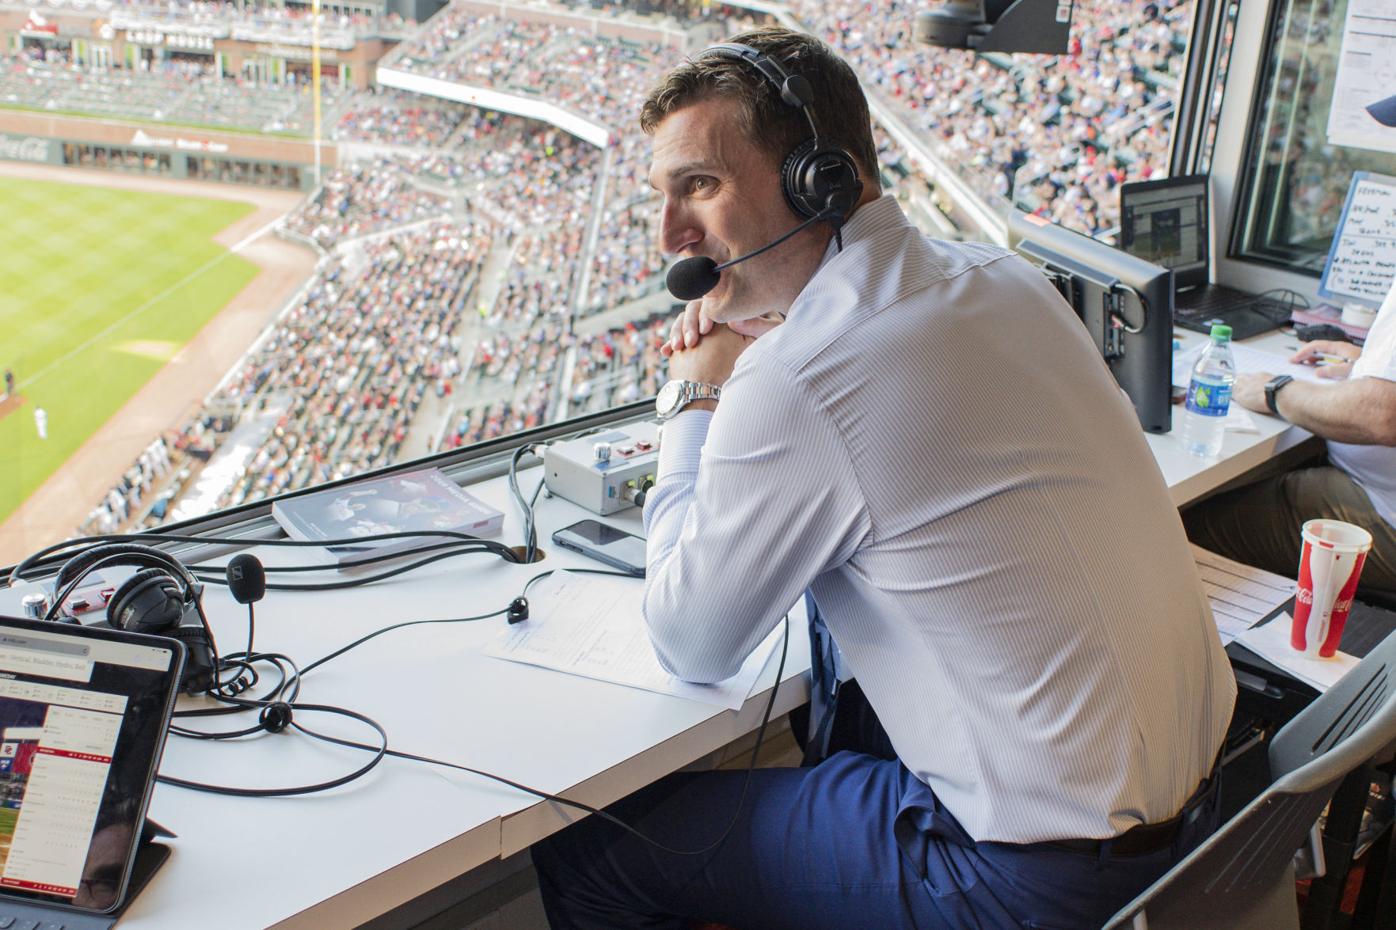 From the baseball field to the broadcast booth, Jeff Francoeur is